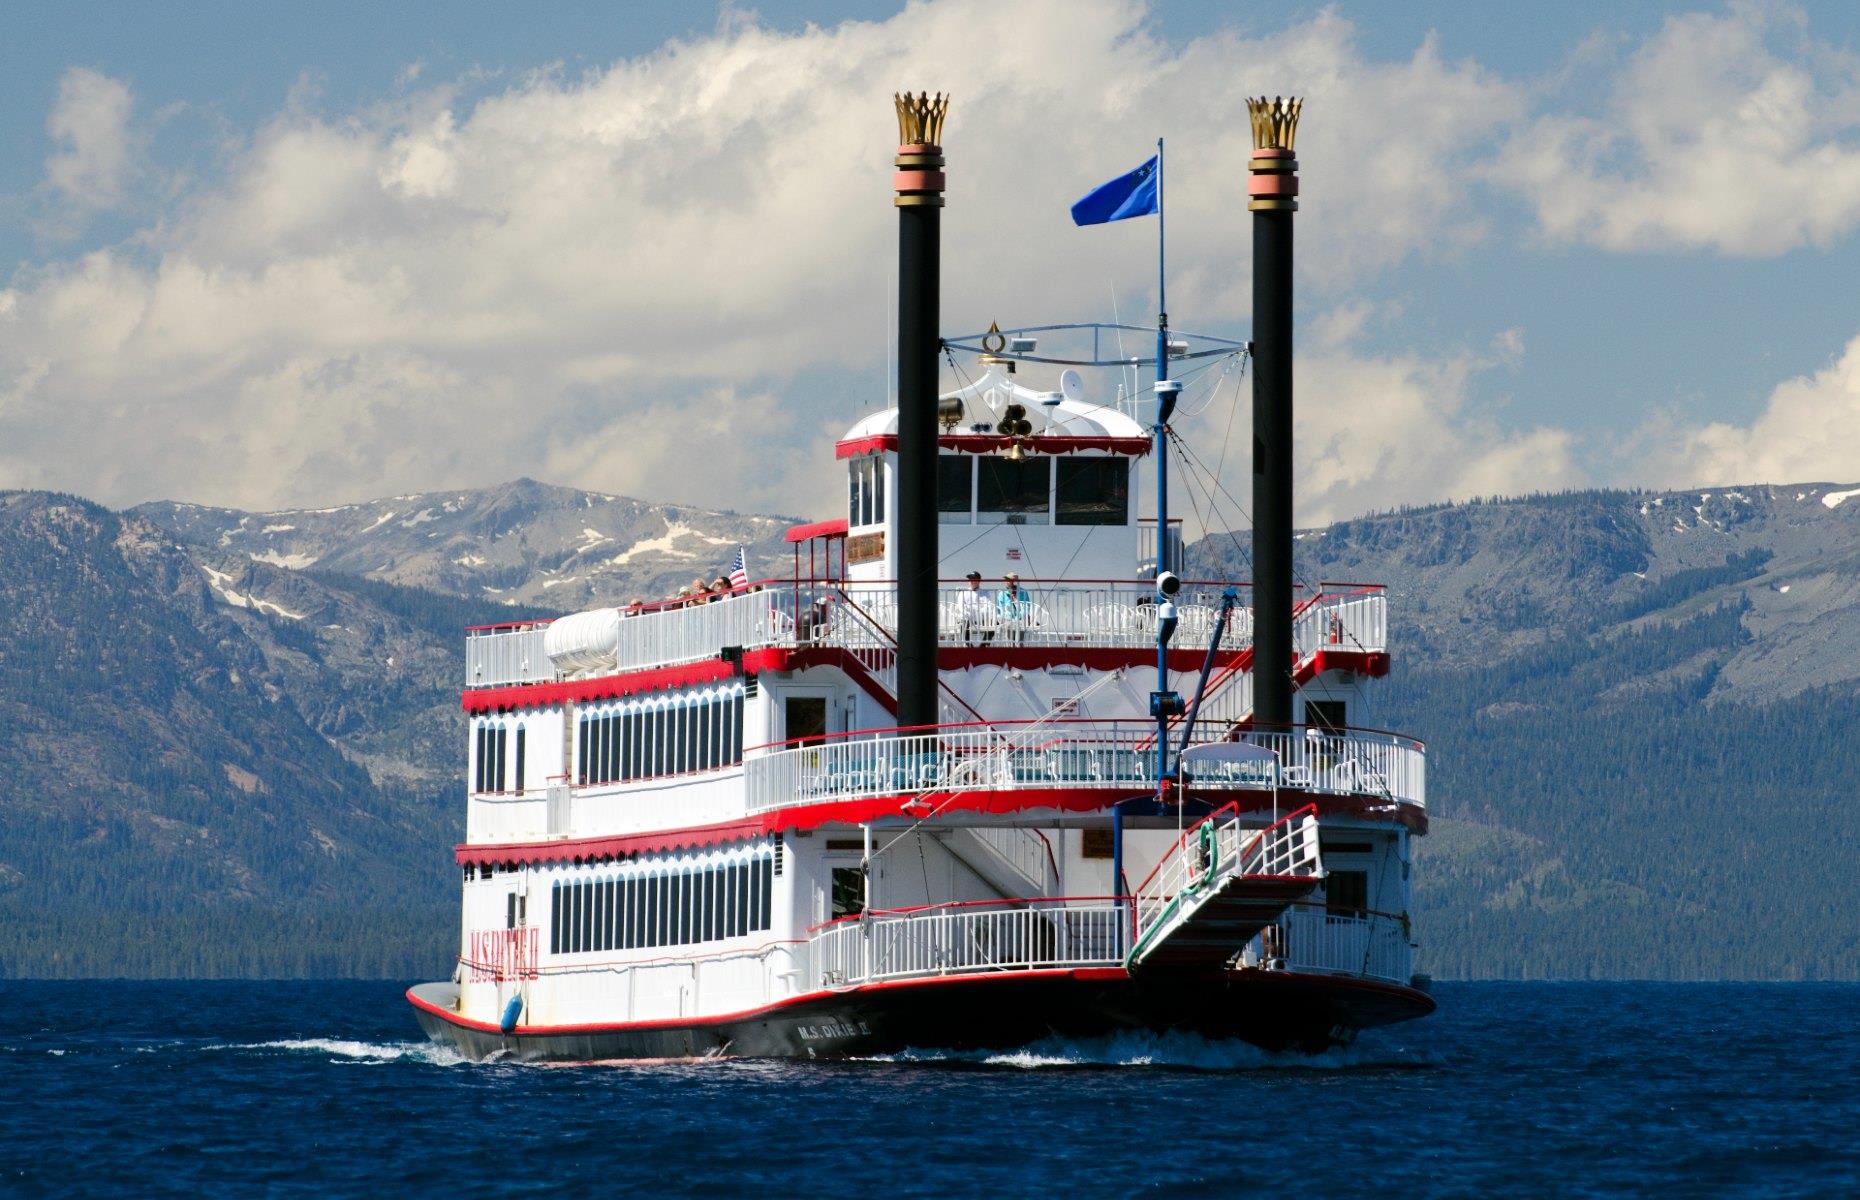 <p>Say hello to one of America’s most spectacular lake cruises. Your mode of transport for this sail across Lake Tahoe will be the <a href="https://tahoesouth.com/boats/m-s-dixie-ii-paddlewheeler/">M.S Dixie II</a> – the lake’s biggest boat. The sunset dinner cruises are popular with couples, although we recommend the scenic daytime tours, which are a great way to explore North America’s largest alpine lake. This high-altitude body of water spreads into two states (California and Nevada), contains enough water to cover California with 14 inches of water and is deeper than the Empire State Building is tall.  </p>